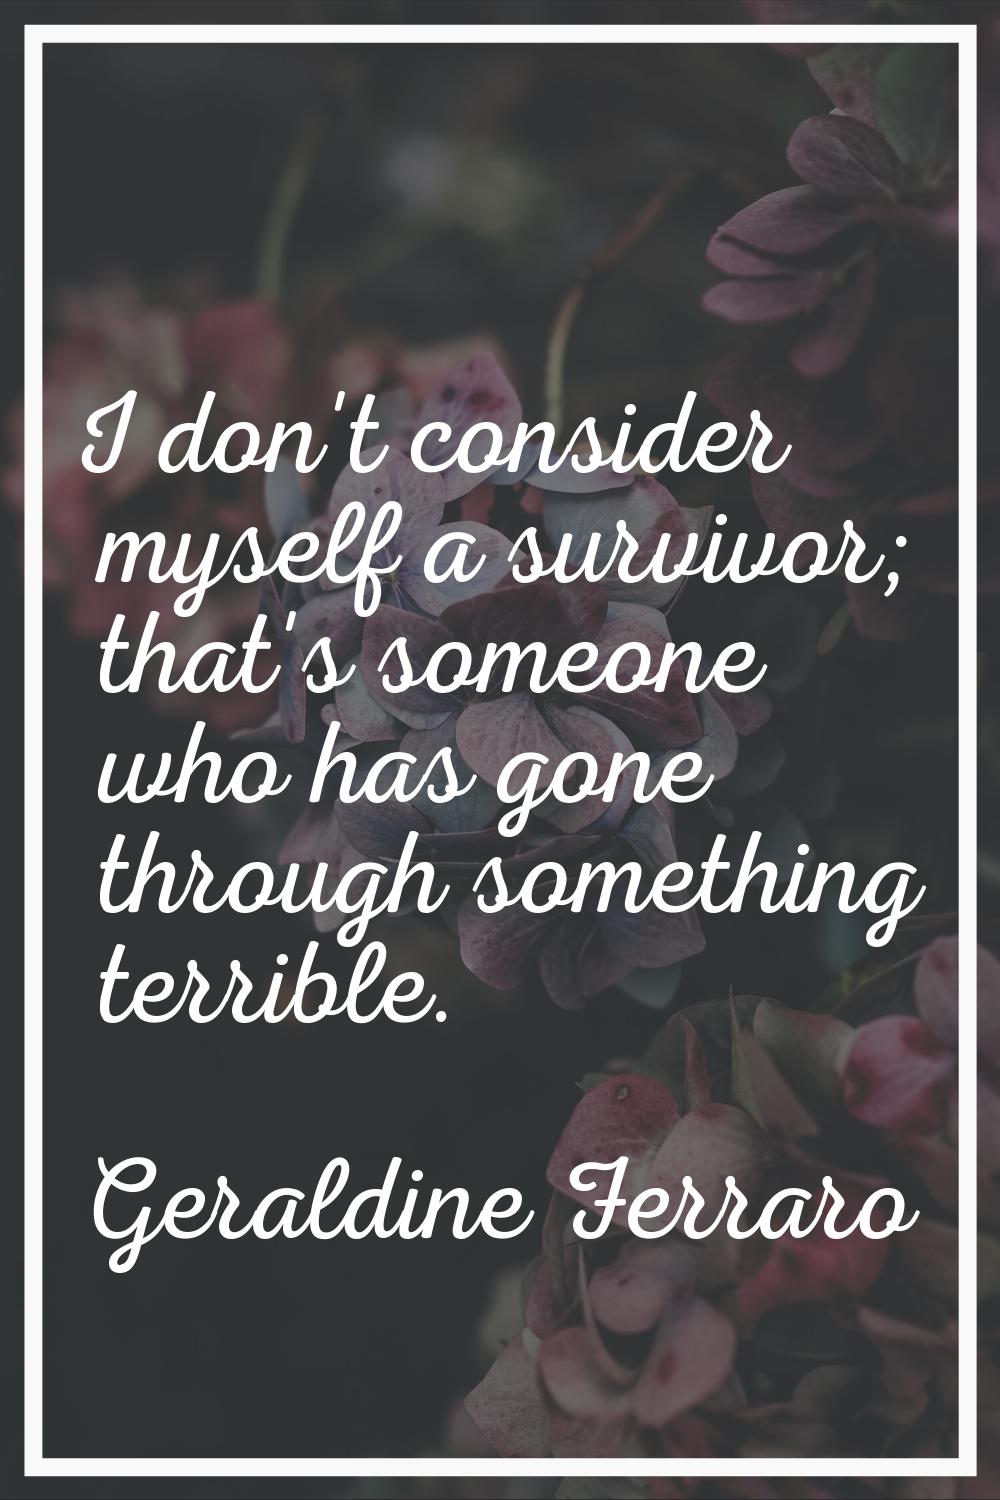 I don't consider myself a survivor; that's someone who has gone through something terrible.